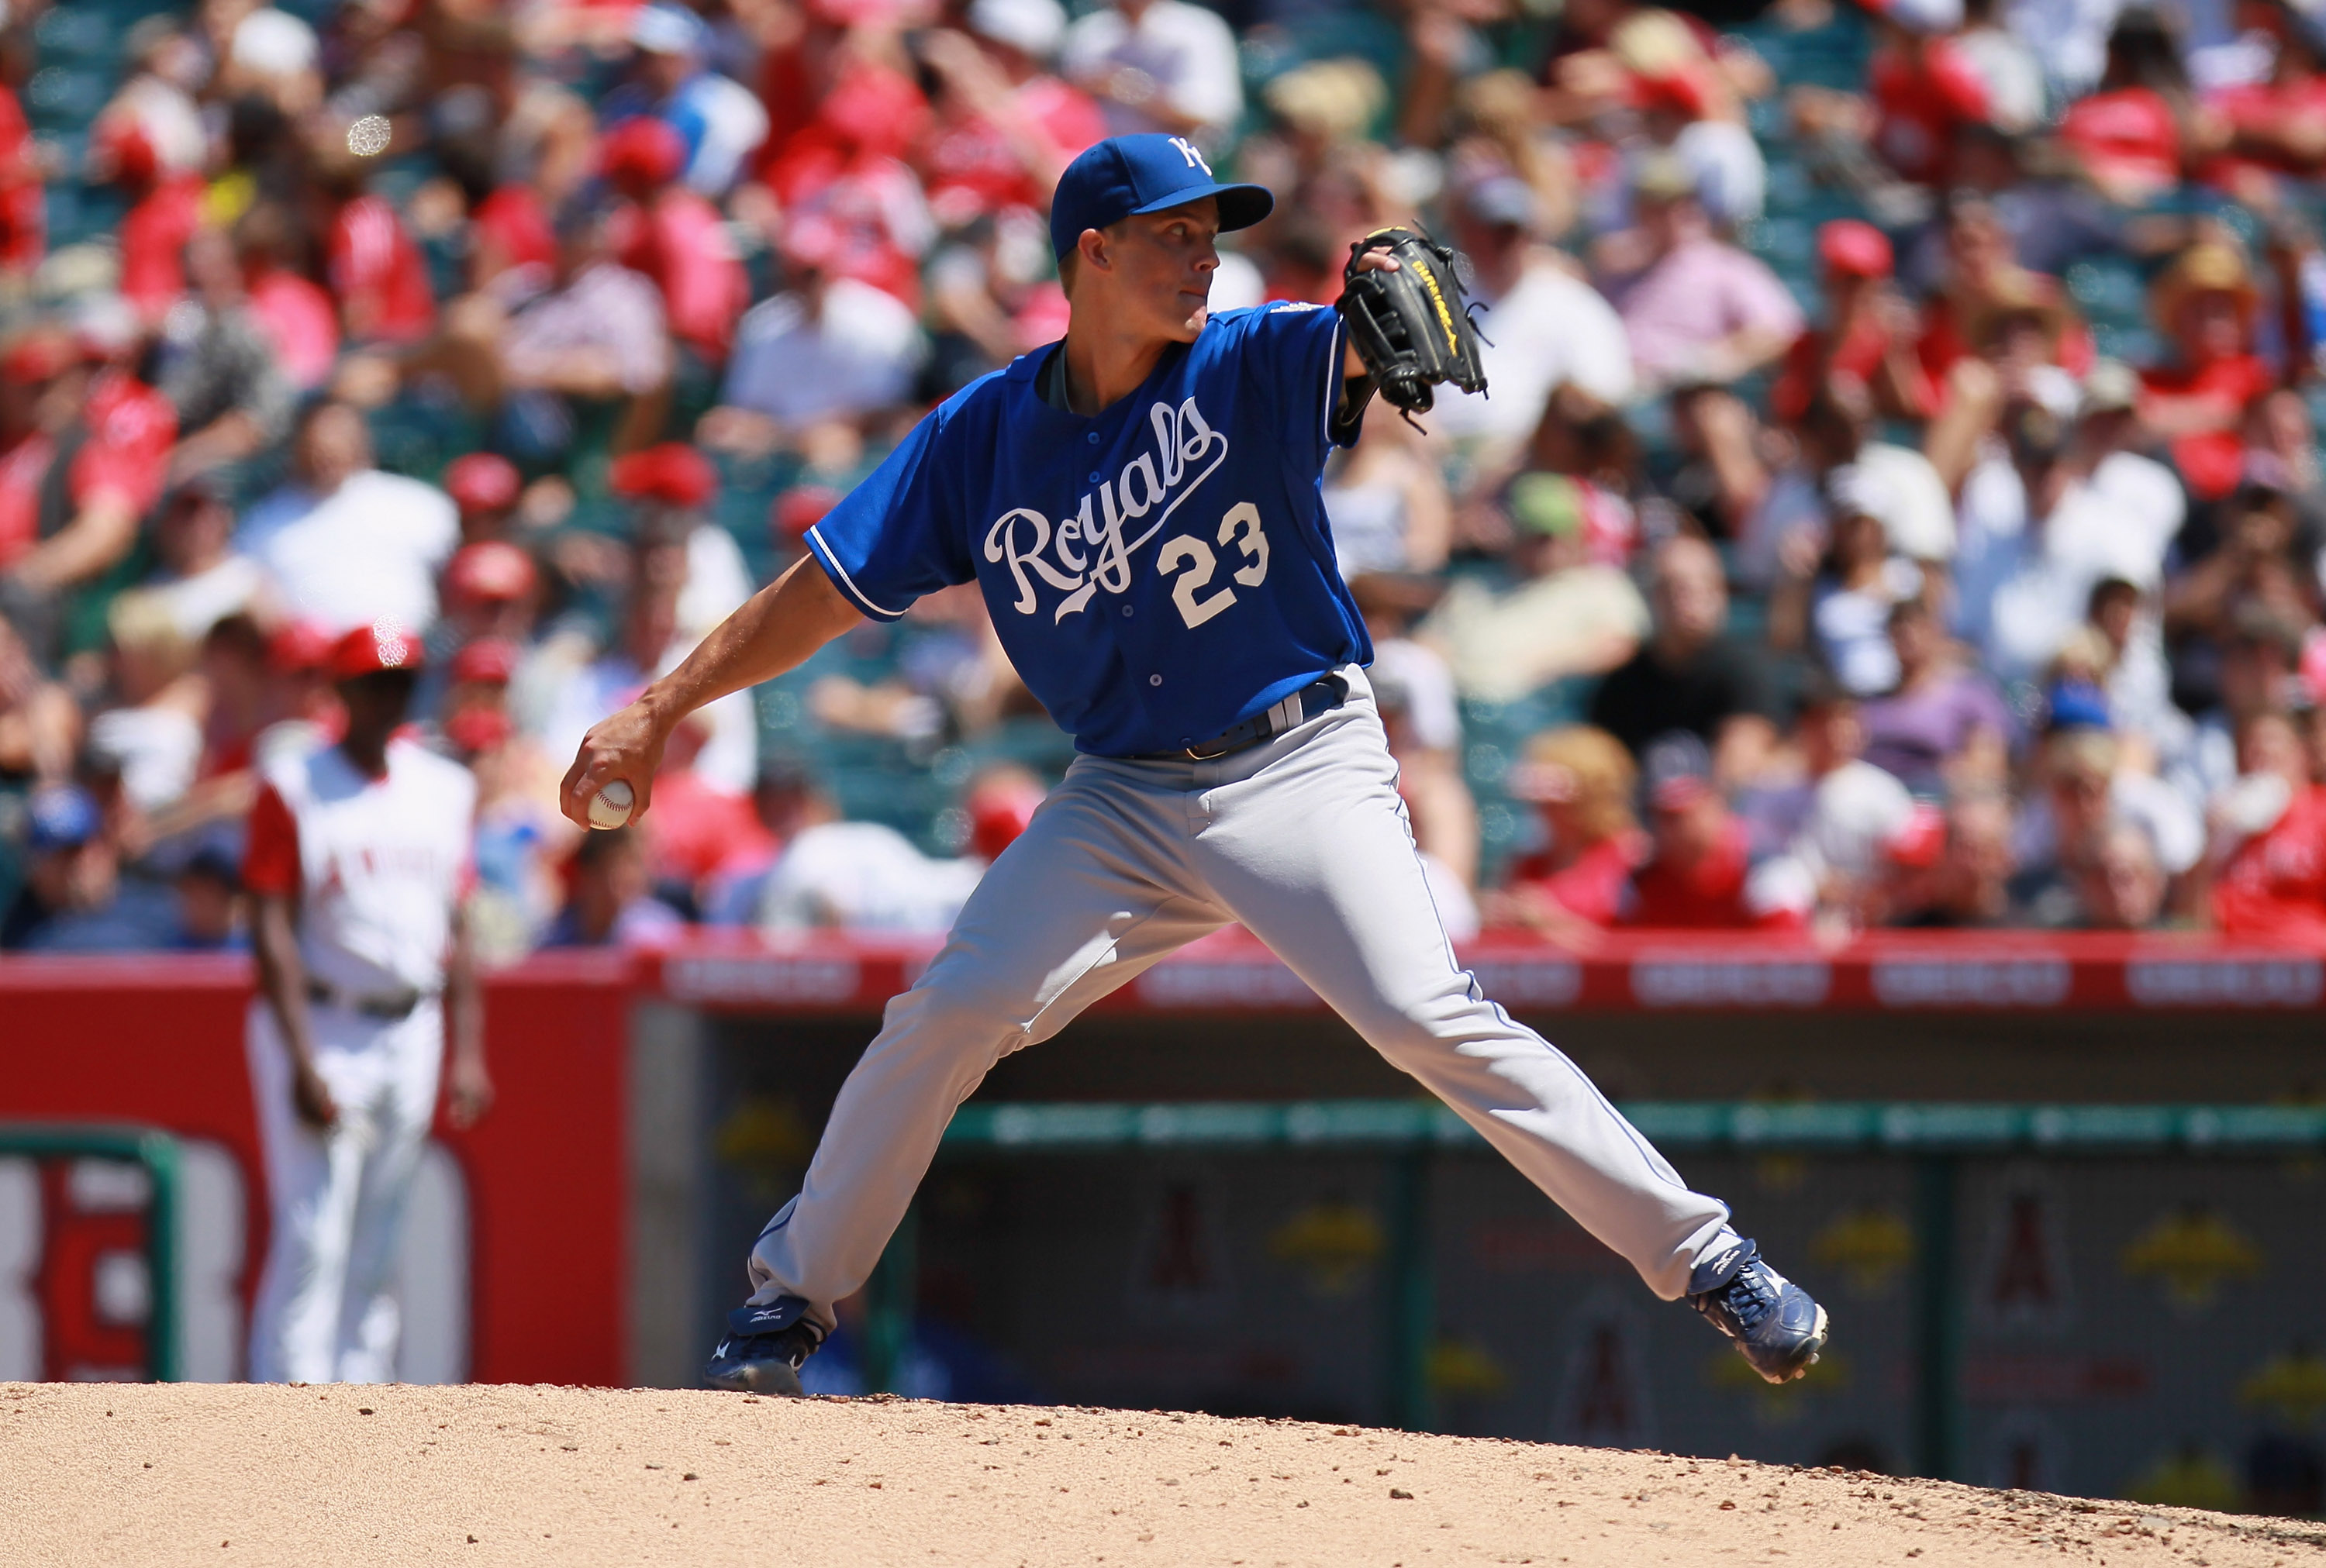 ANAHEIM, CA - AUGUST 11:  Zack Greinke #23 of the Kansas City Royals pitches against the Los Angeles Angels of Anaheim at Angel Stadium on August 11, 2010 in Anaheim, California.  (Photo by Jeff Gross/Getty Images)